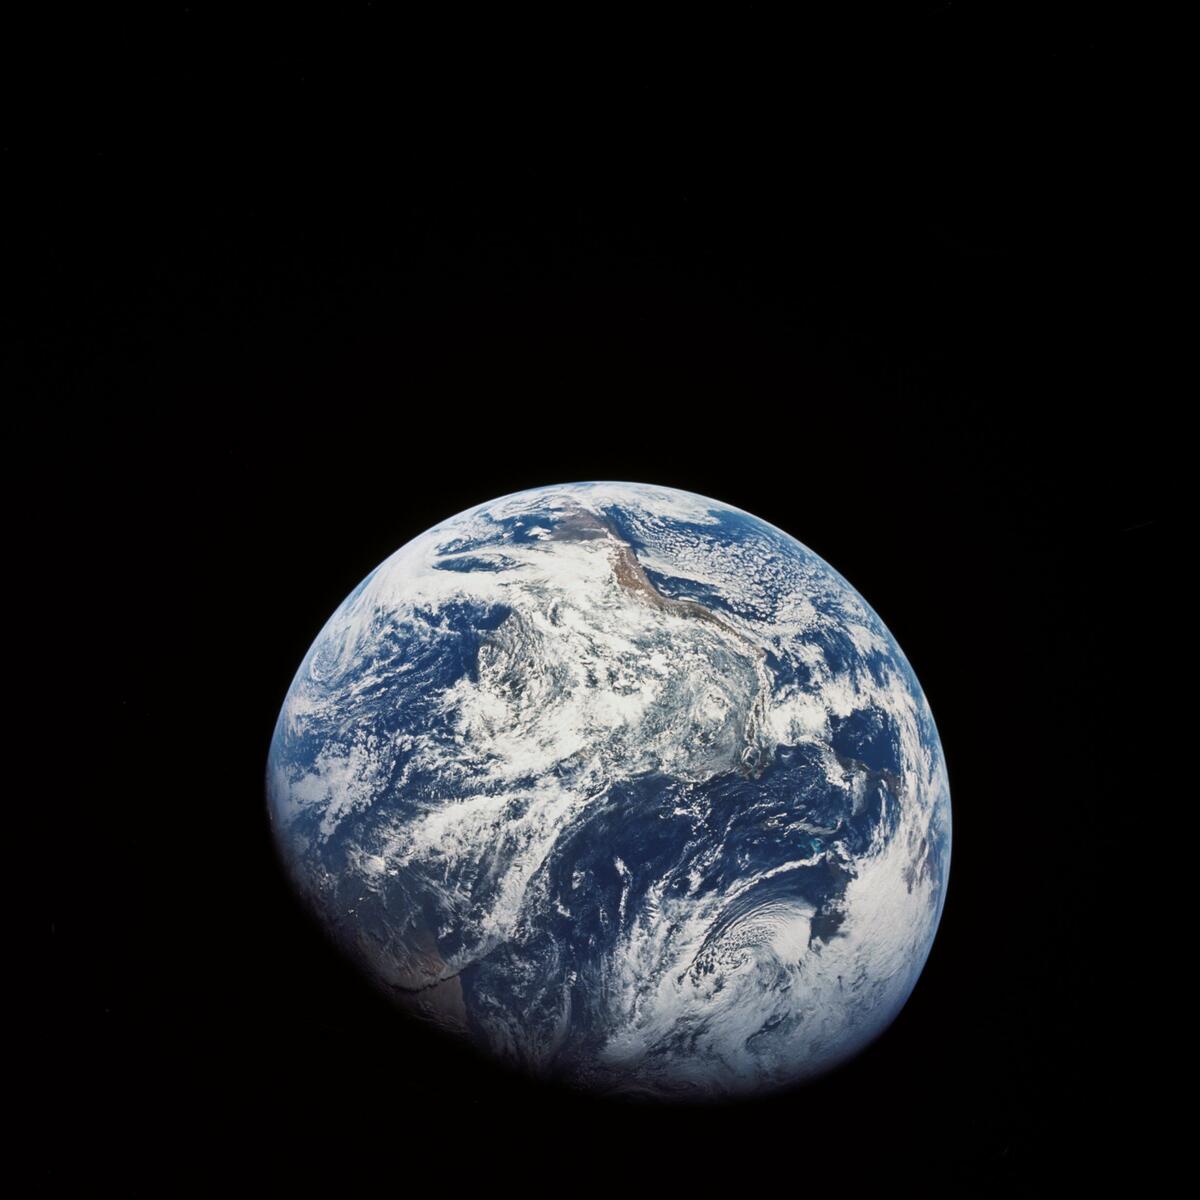 This is what planet Earth looks like from a satellite